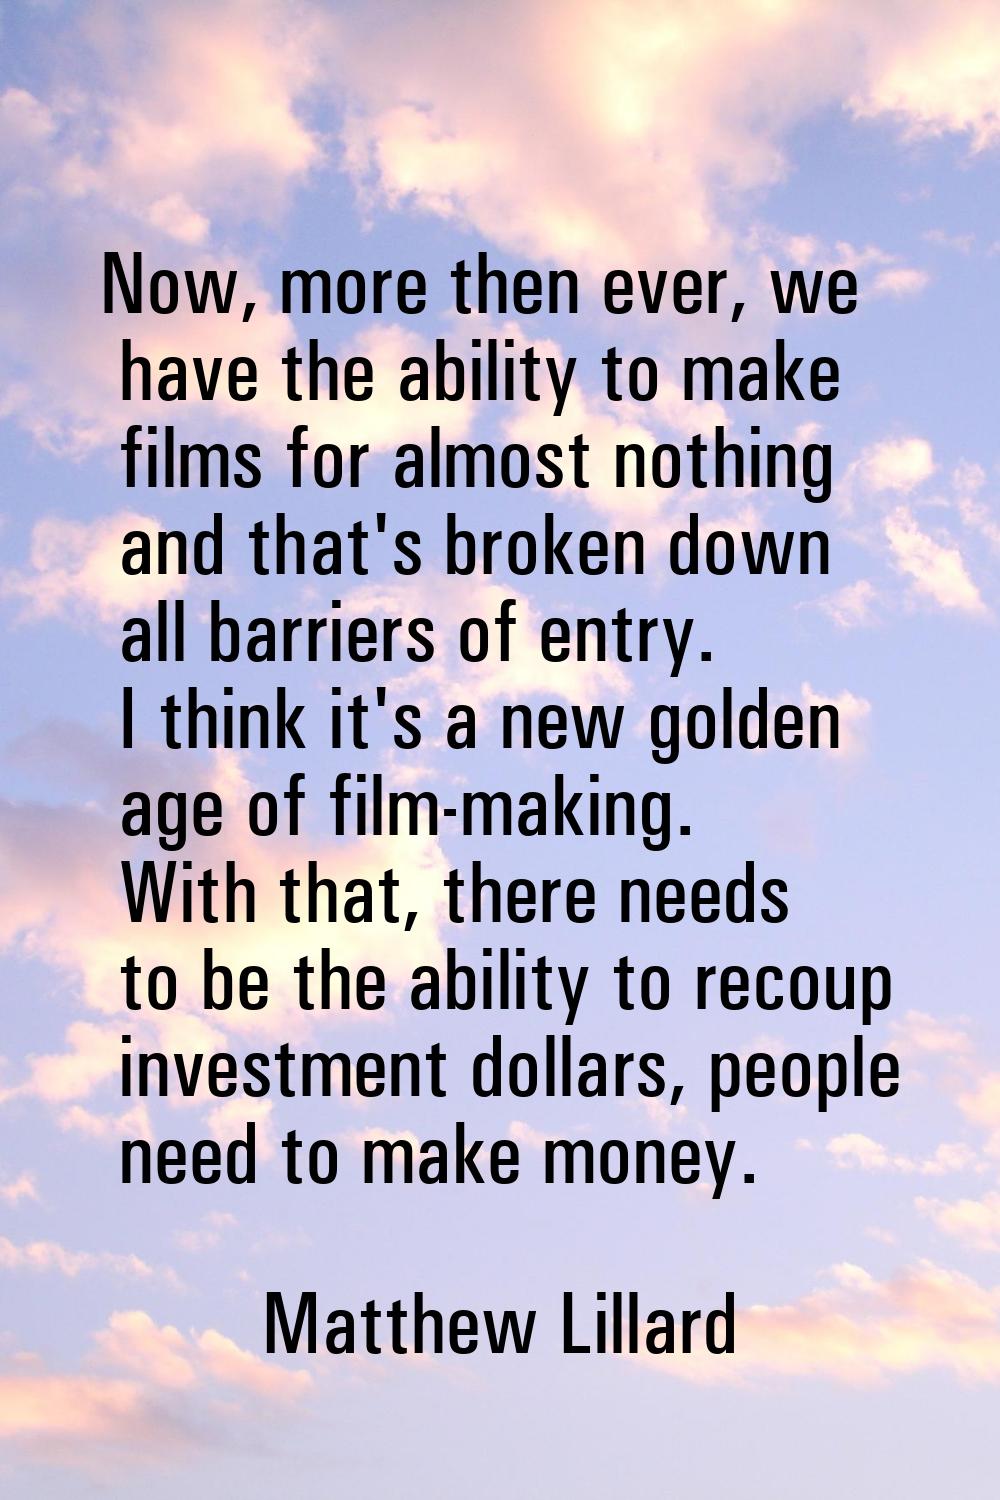 Now, more then ever, we have the ability to make films for almost nothing and that's broken down al